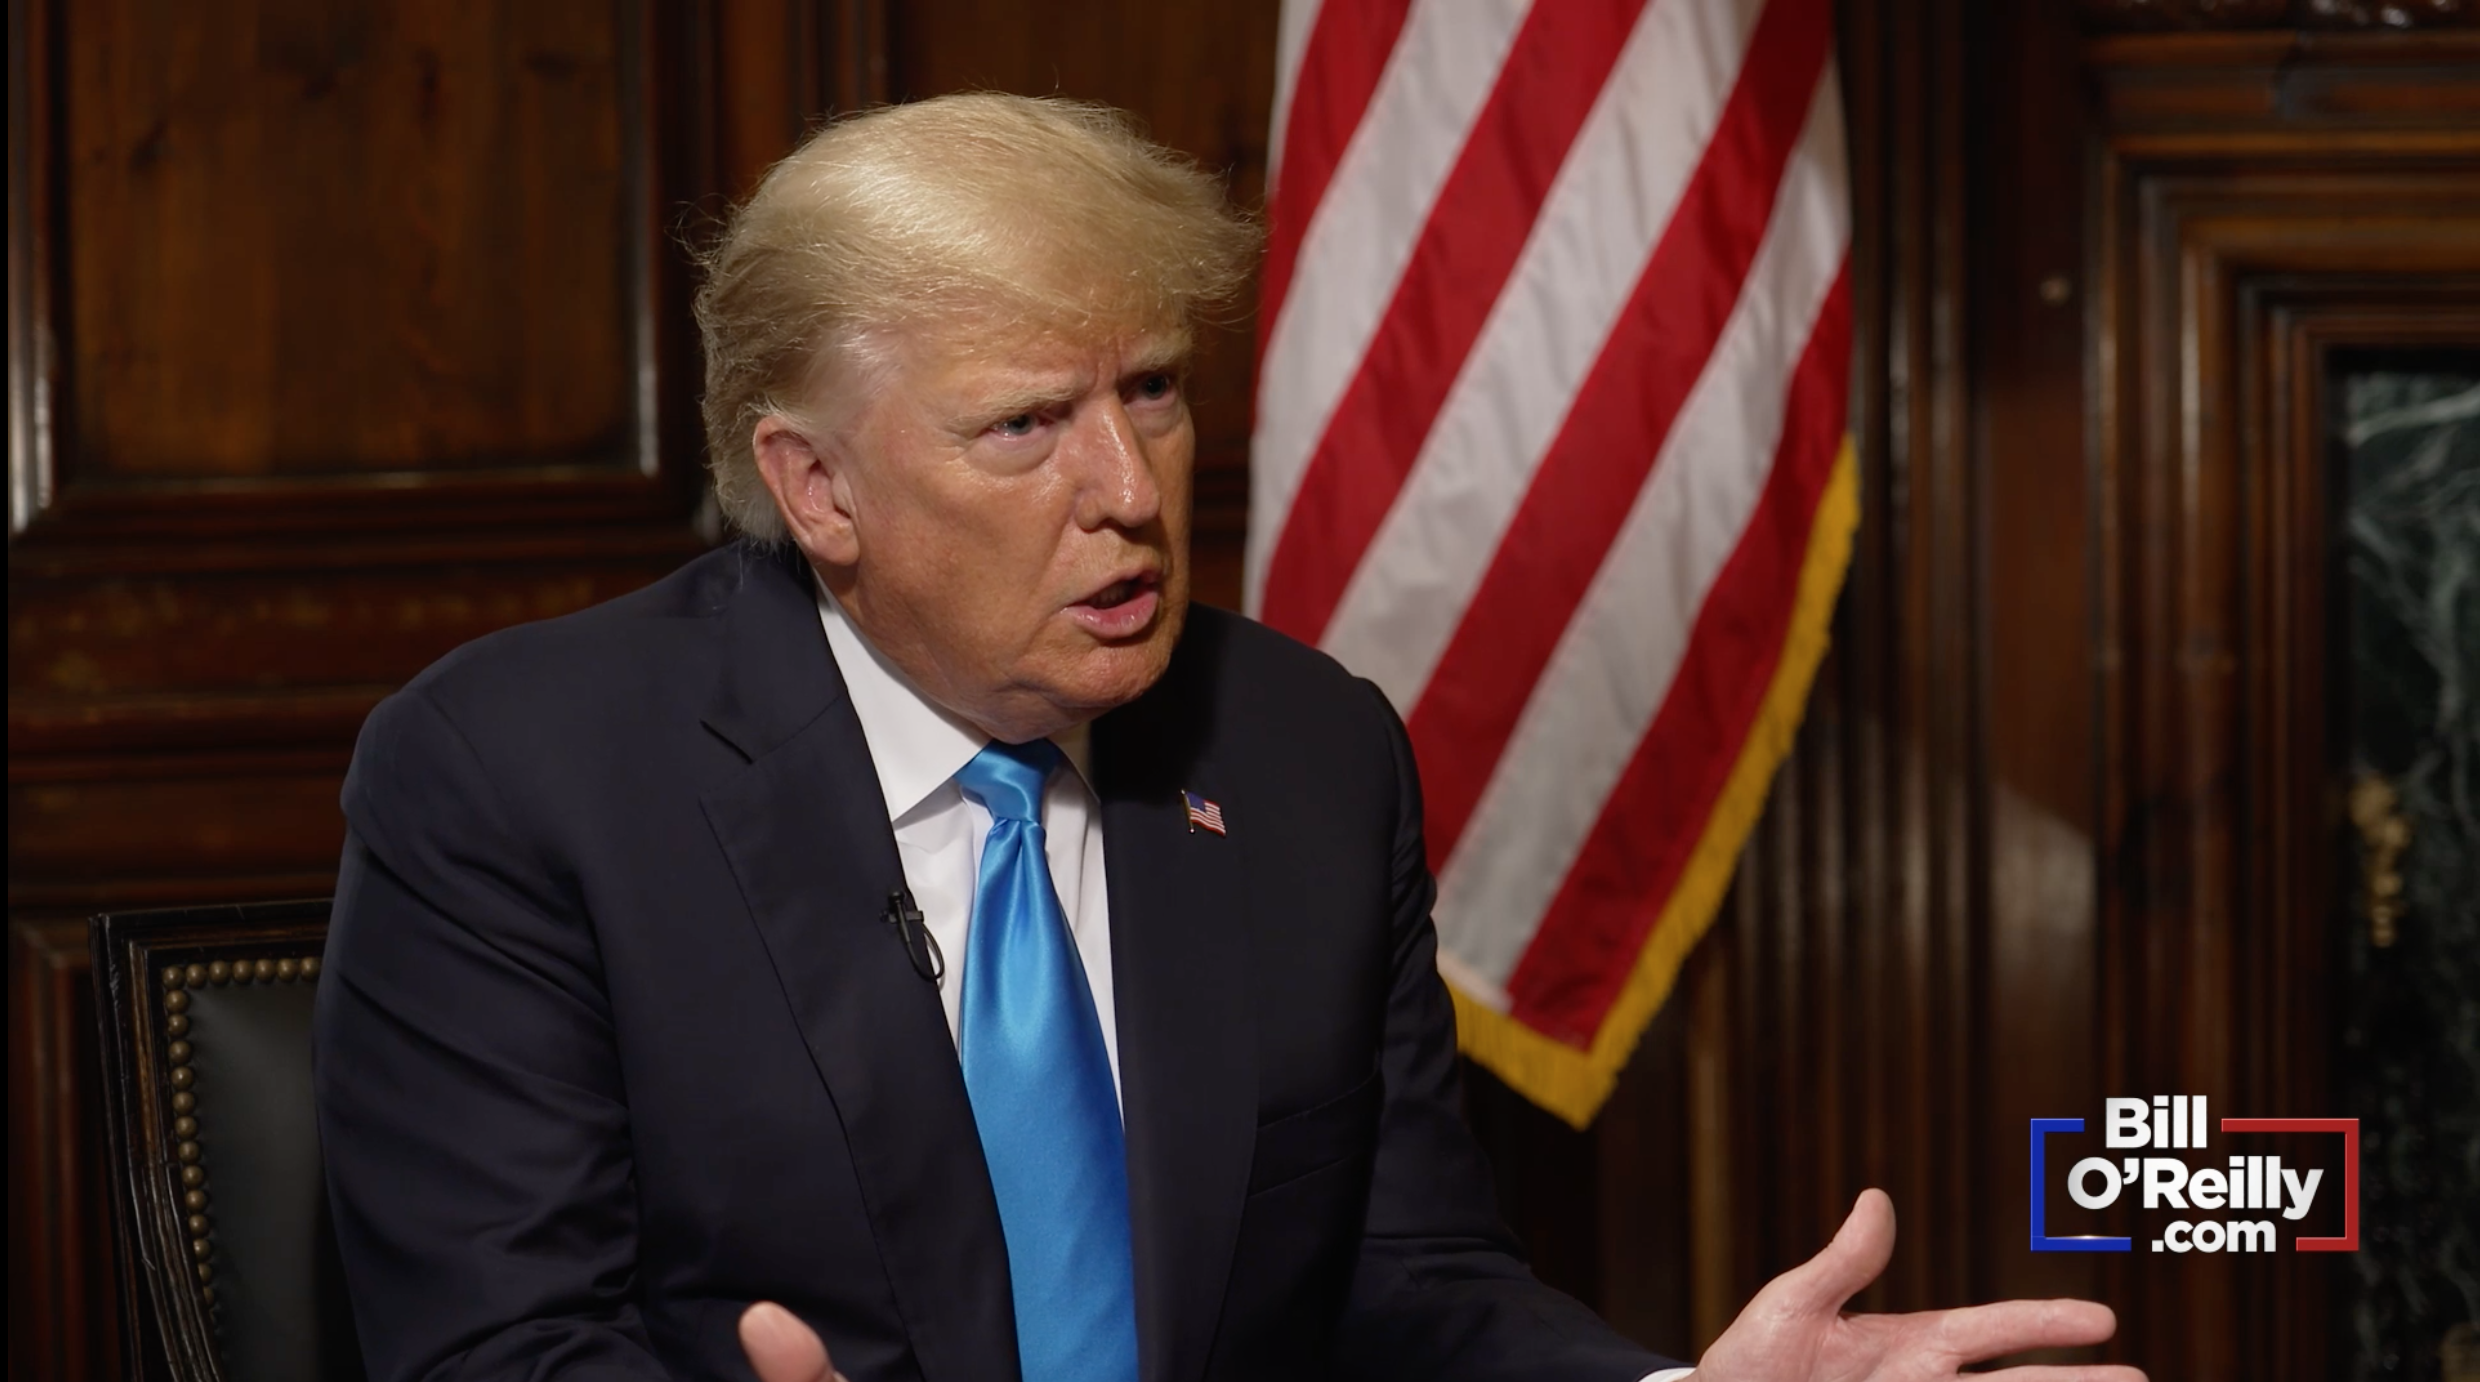 WATCH: Trump on 2024: 'I will do whatever it takes'